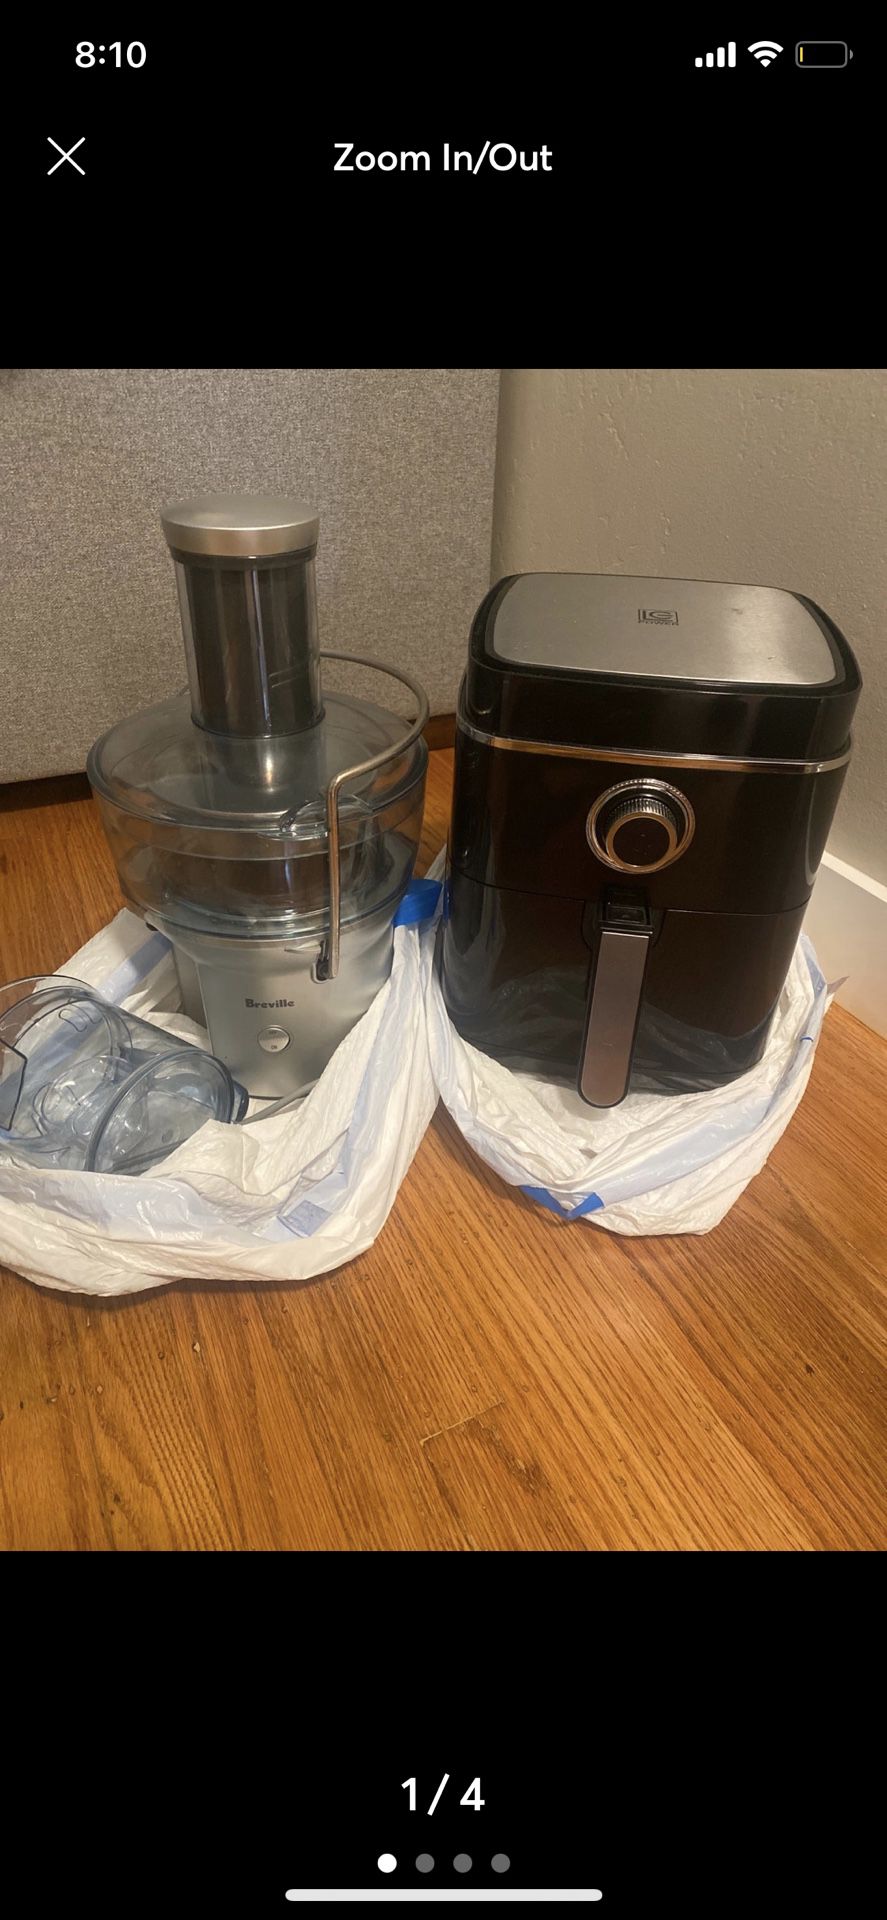 Moving Bundle - $95 - Bessel Steam Mop, Spin Mop, Juicer And Air fryer 